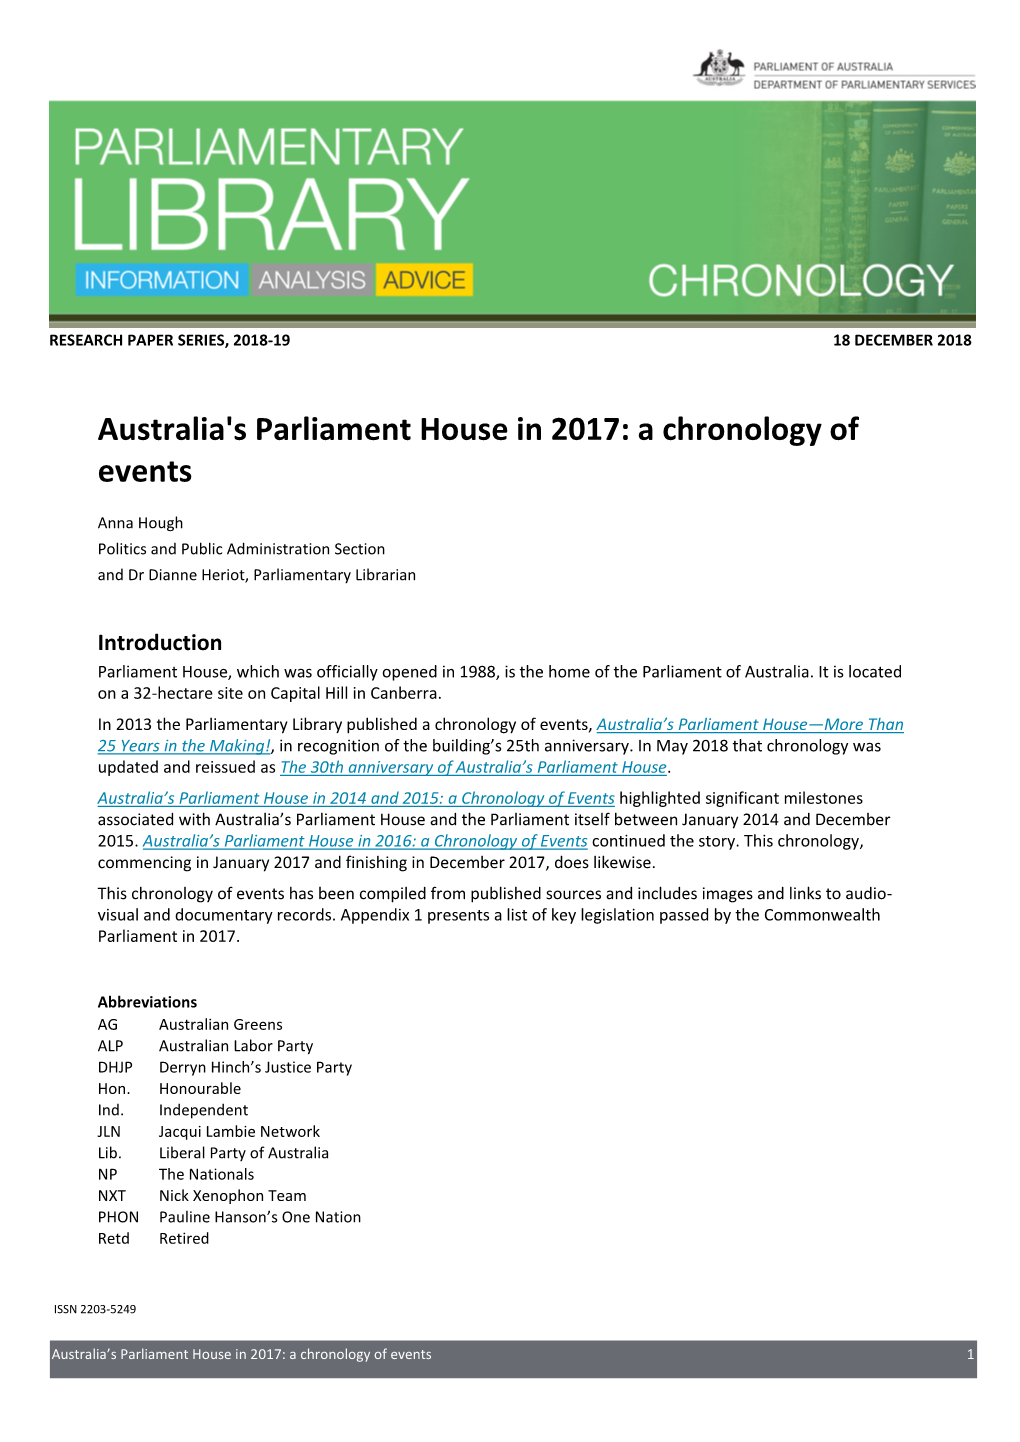 Australia's Parliament House in 2017: a Chronology of Events